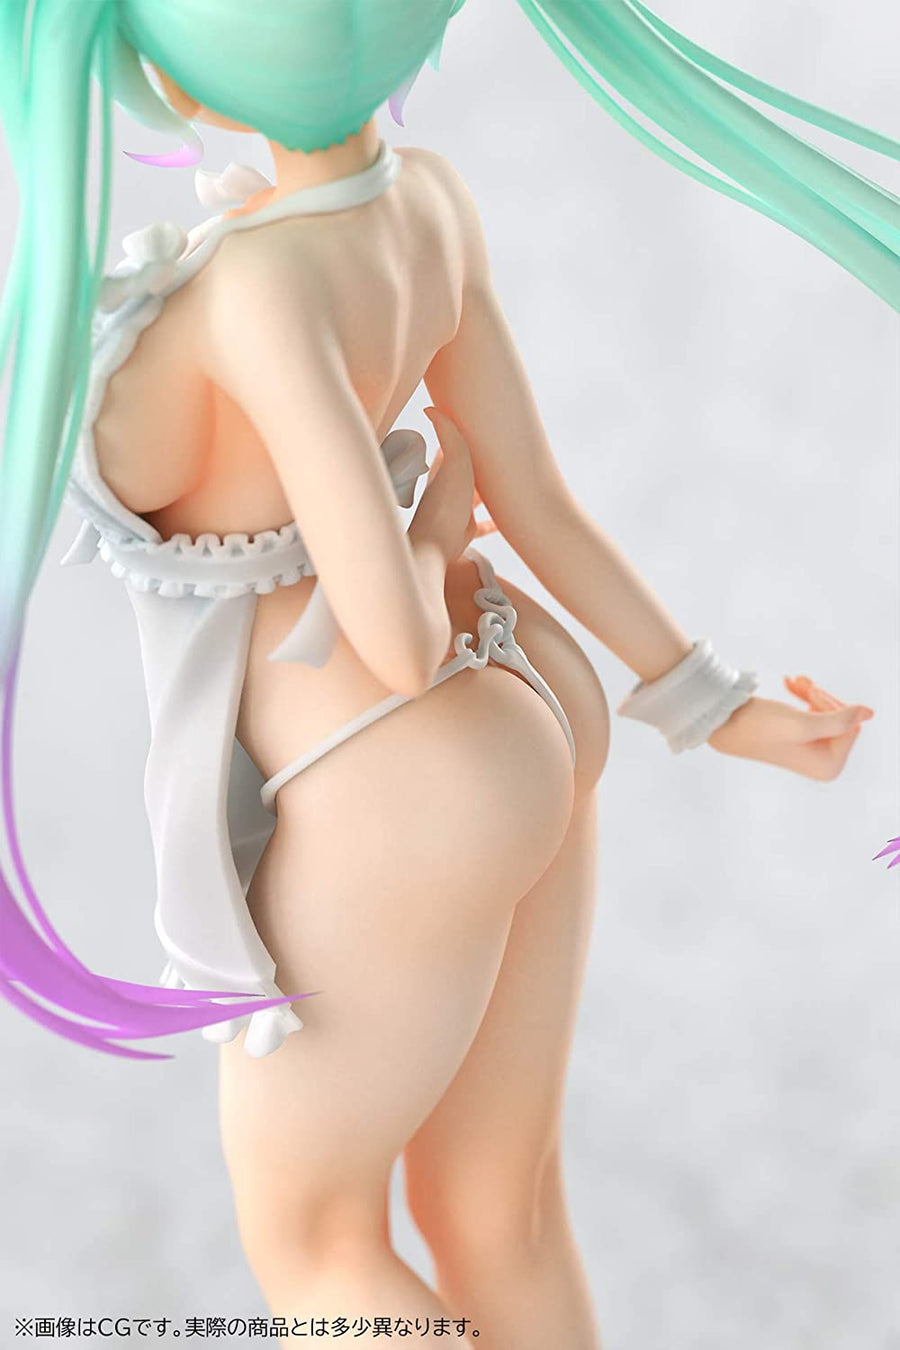 Original Character - Swimsuit Girls Collection - Eri - 1/5 - With Feet Ver. (Insight)